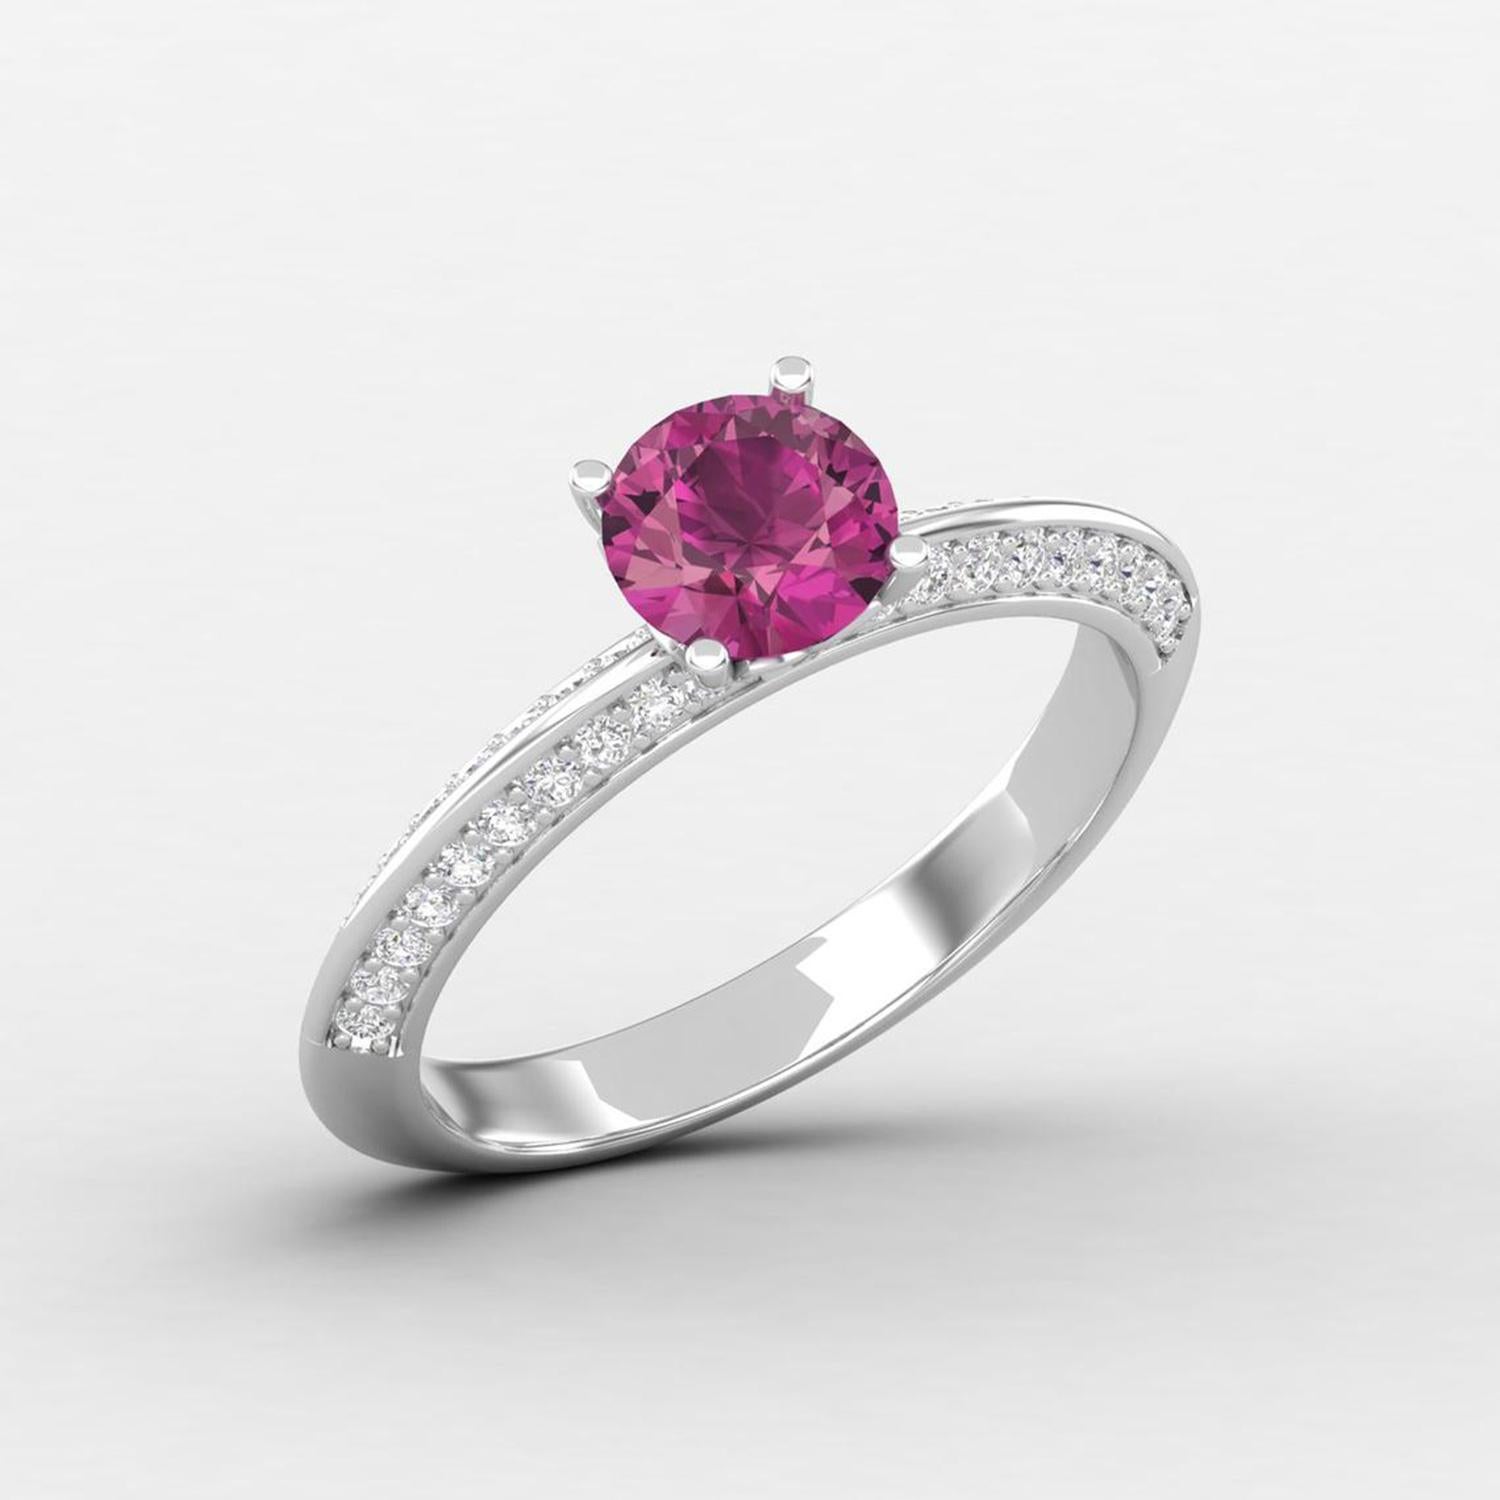 Women's 14 K Gold Pink Rubellite Tourmaline Ring / Diamond Solitaire Ring / Ring for Her For Sale